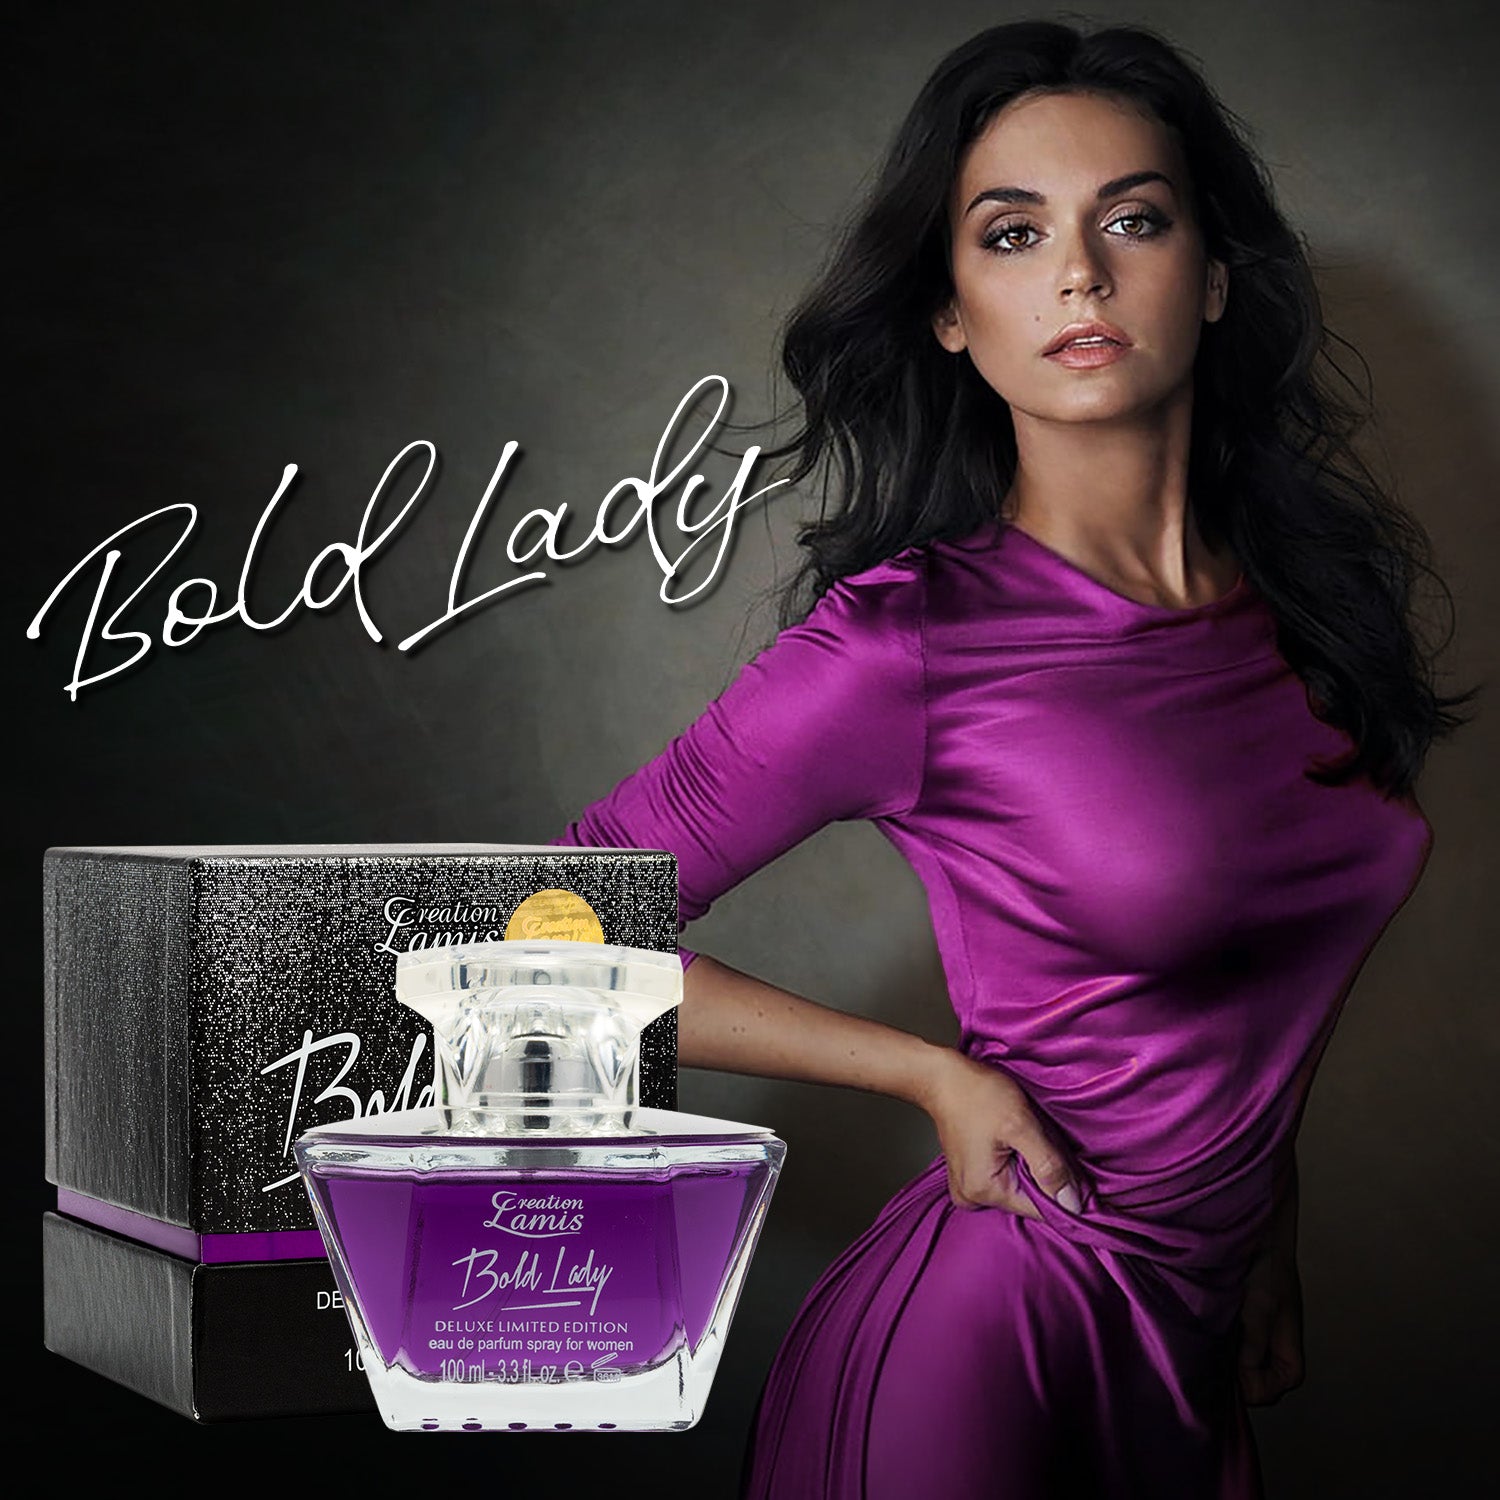 Bold Lady - Deluxe Edition for Women